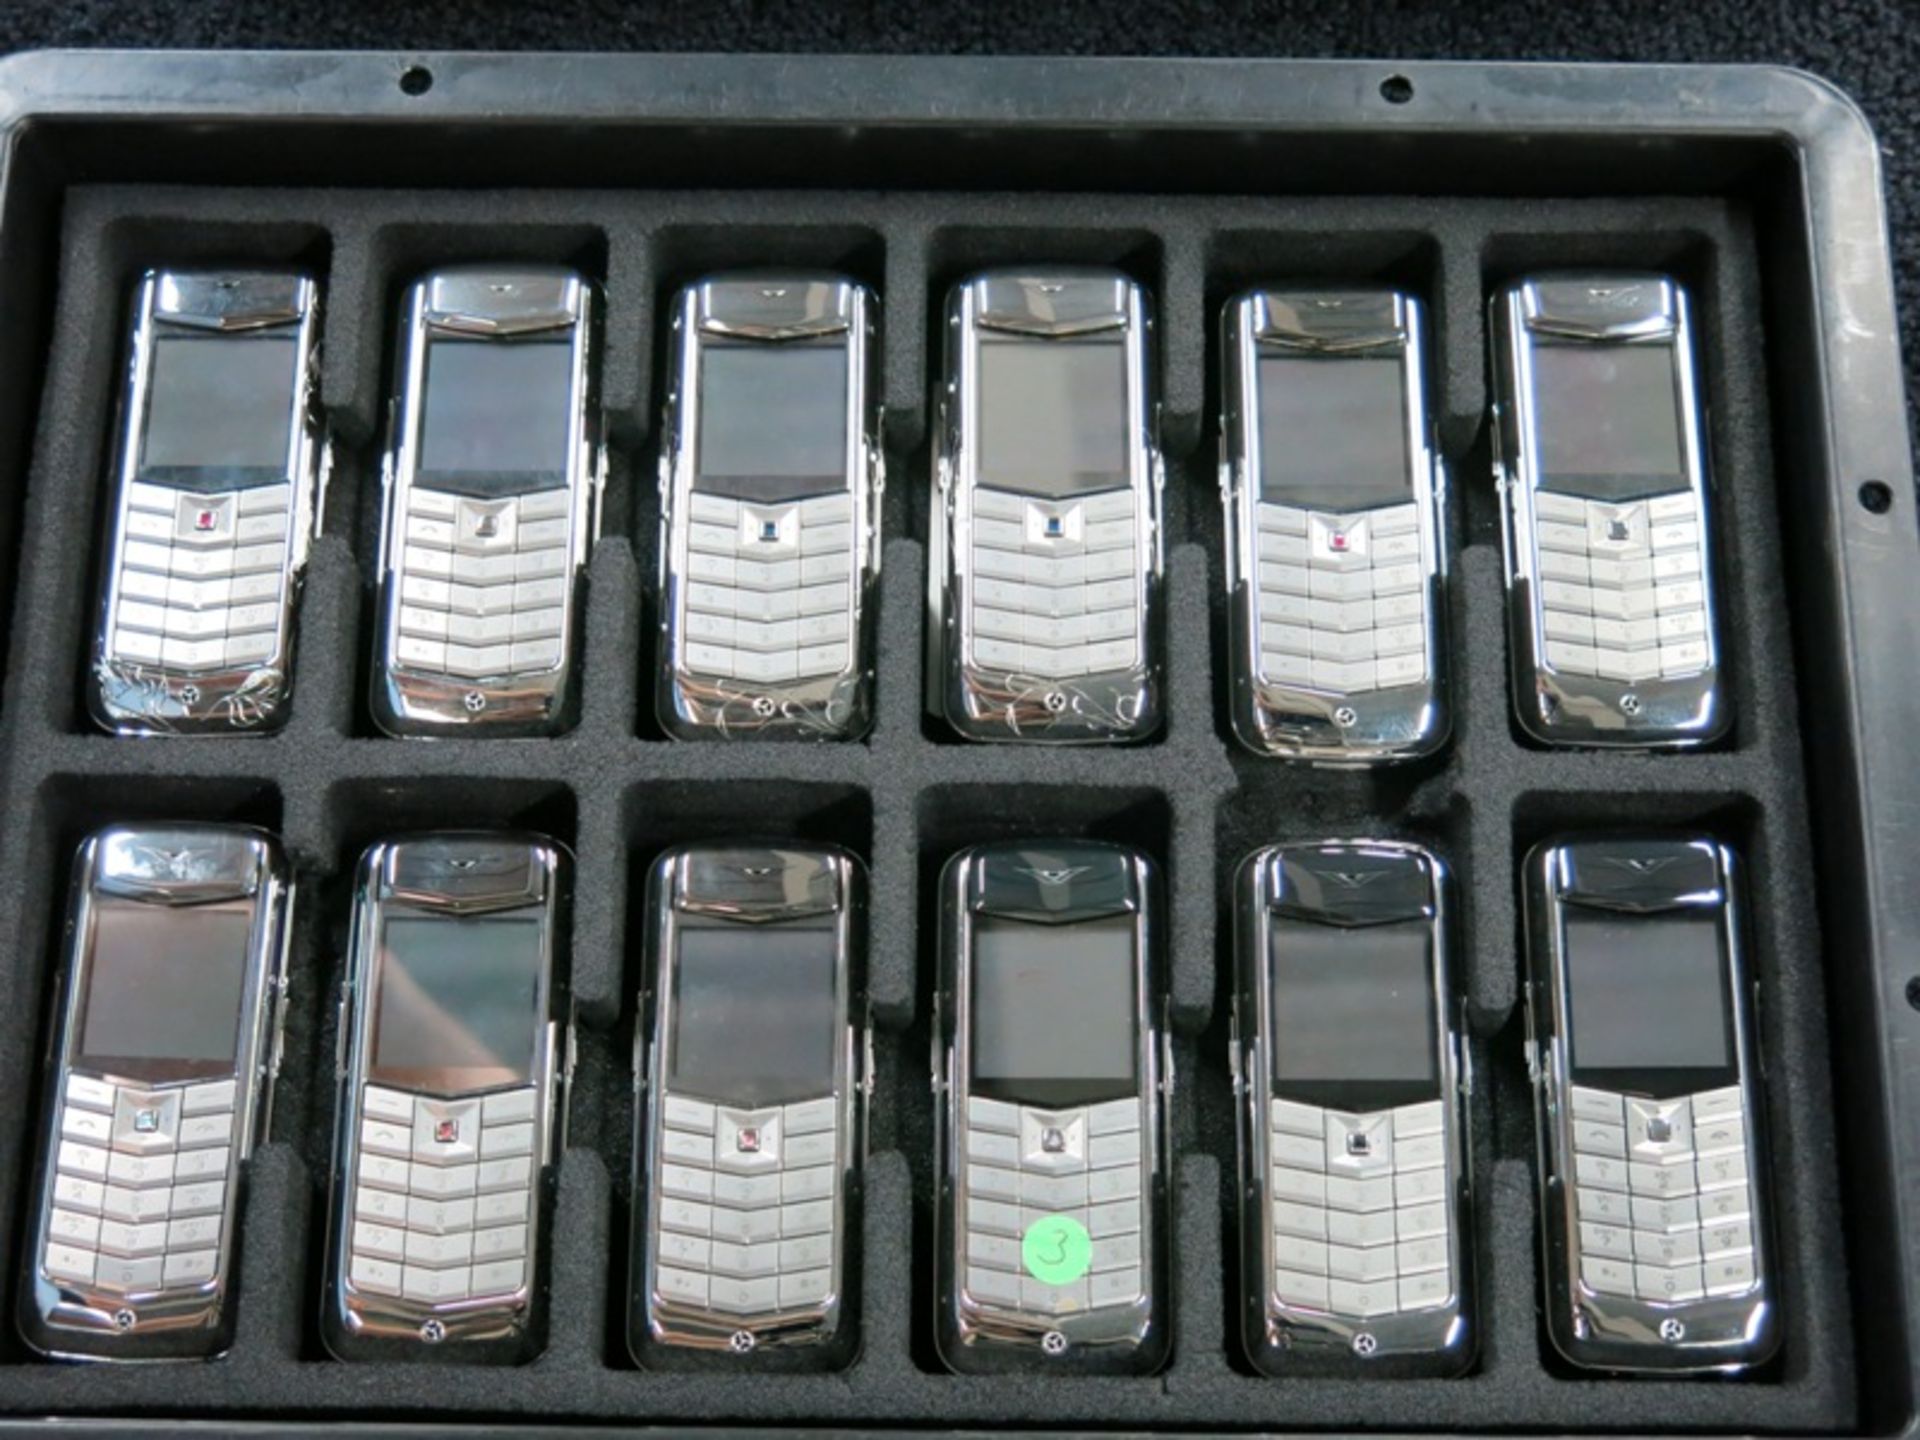 Archive Collection of 49 Vertu Constellation Classic Phones - Image 2 of 5